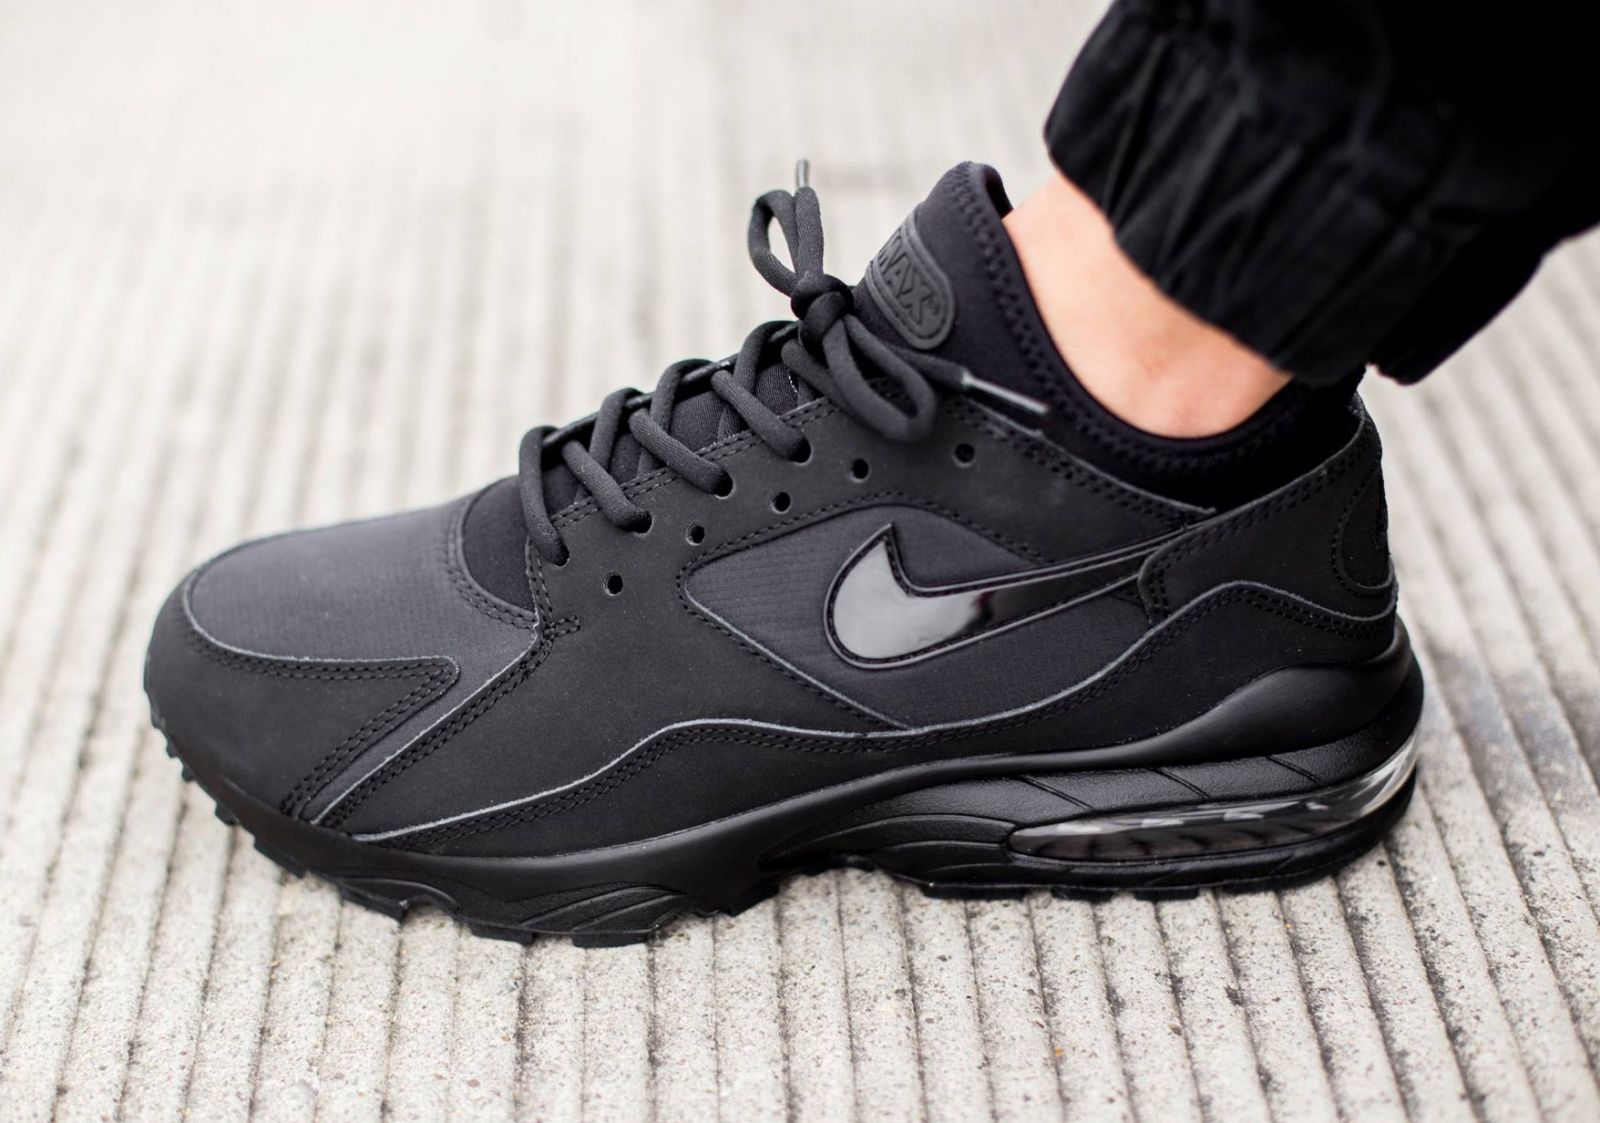 Nike Air Max 93s Are Back in Black 